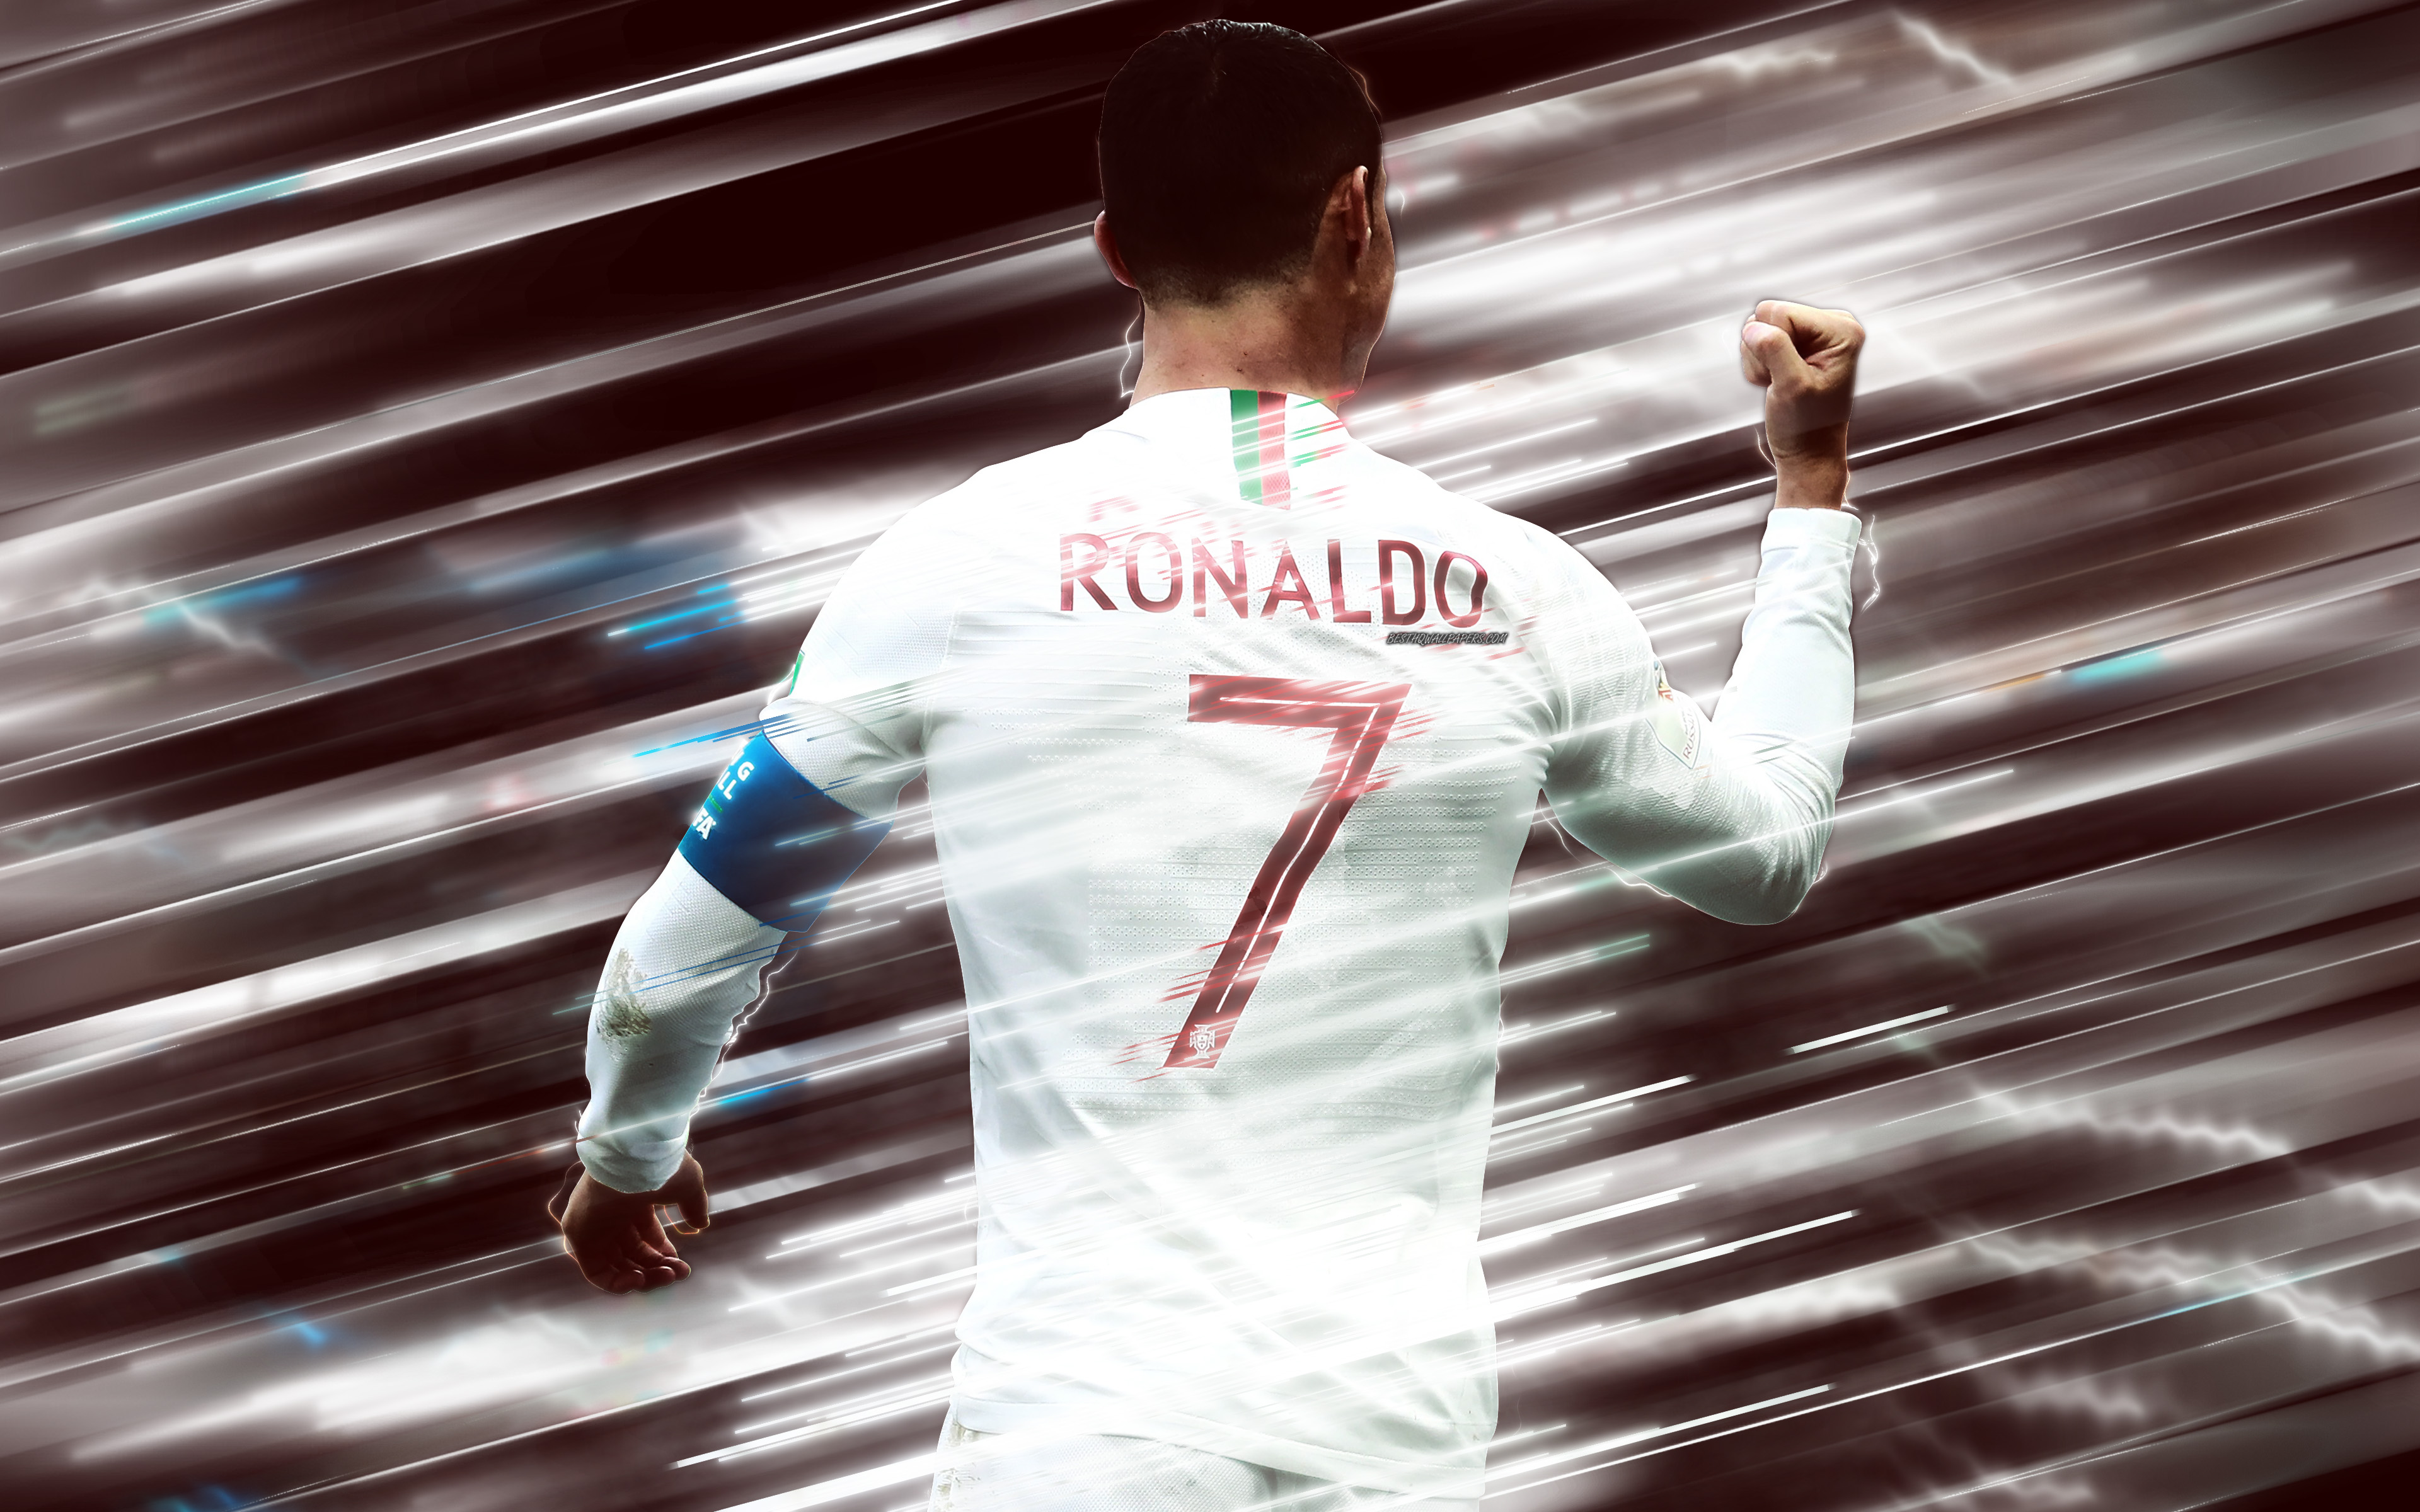 Download wallpaper Cristiano Ronaldo, Portugal national football team, view from the back, football star, 4k, creative art, blades style, Portuguese footballer, Portugal, CR red creative background, football for desktop with resolution 3840x2400